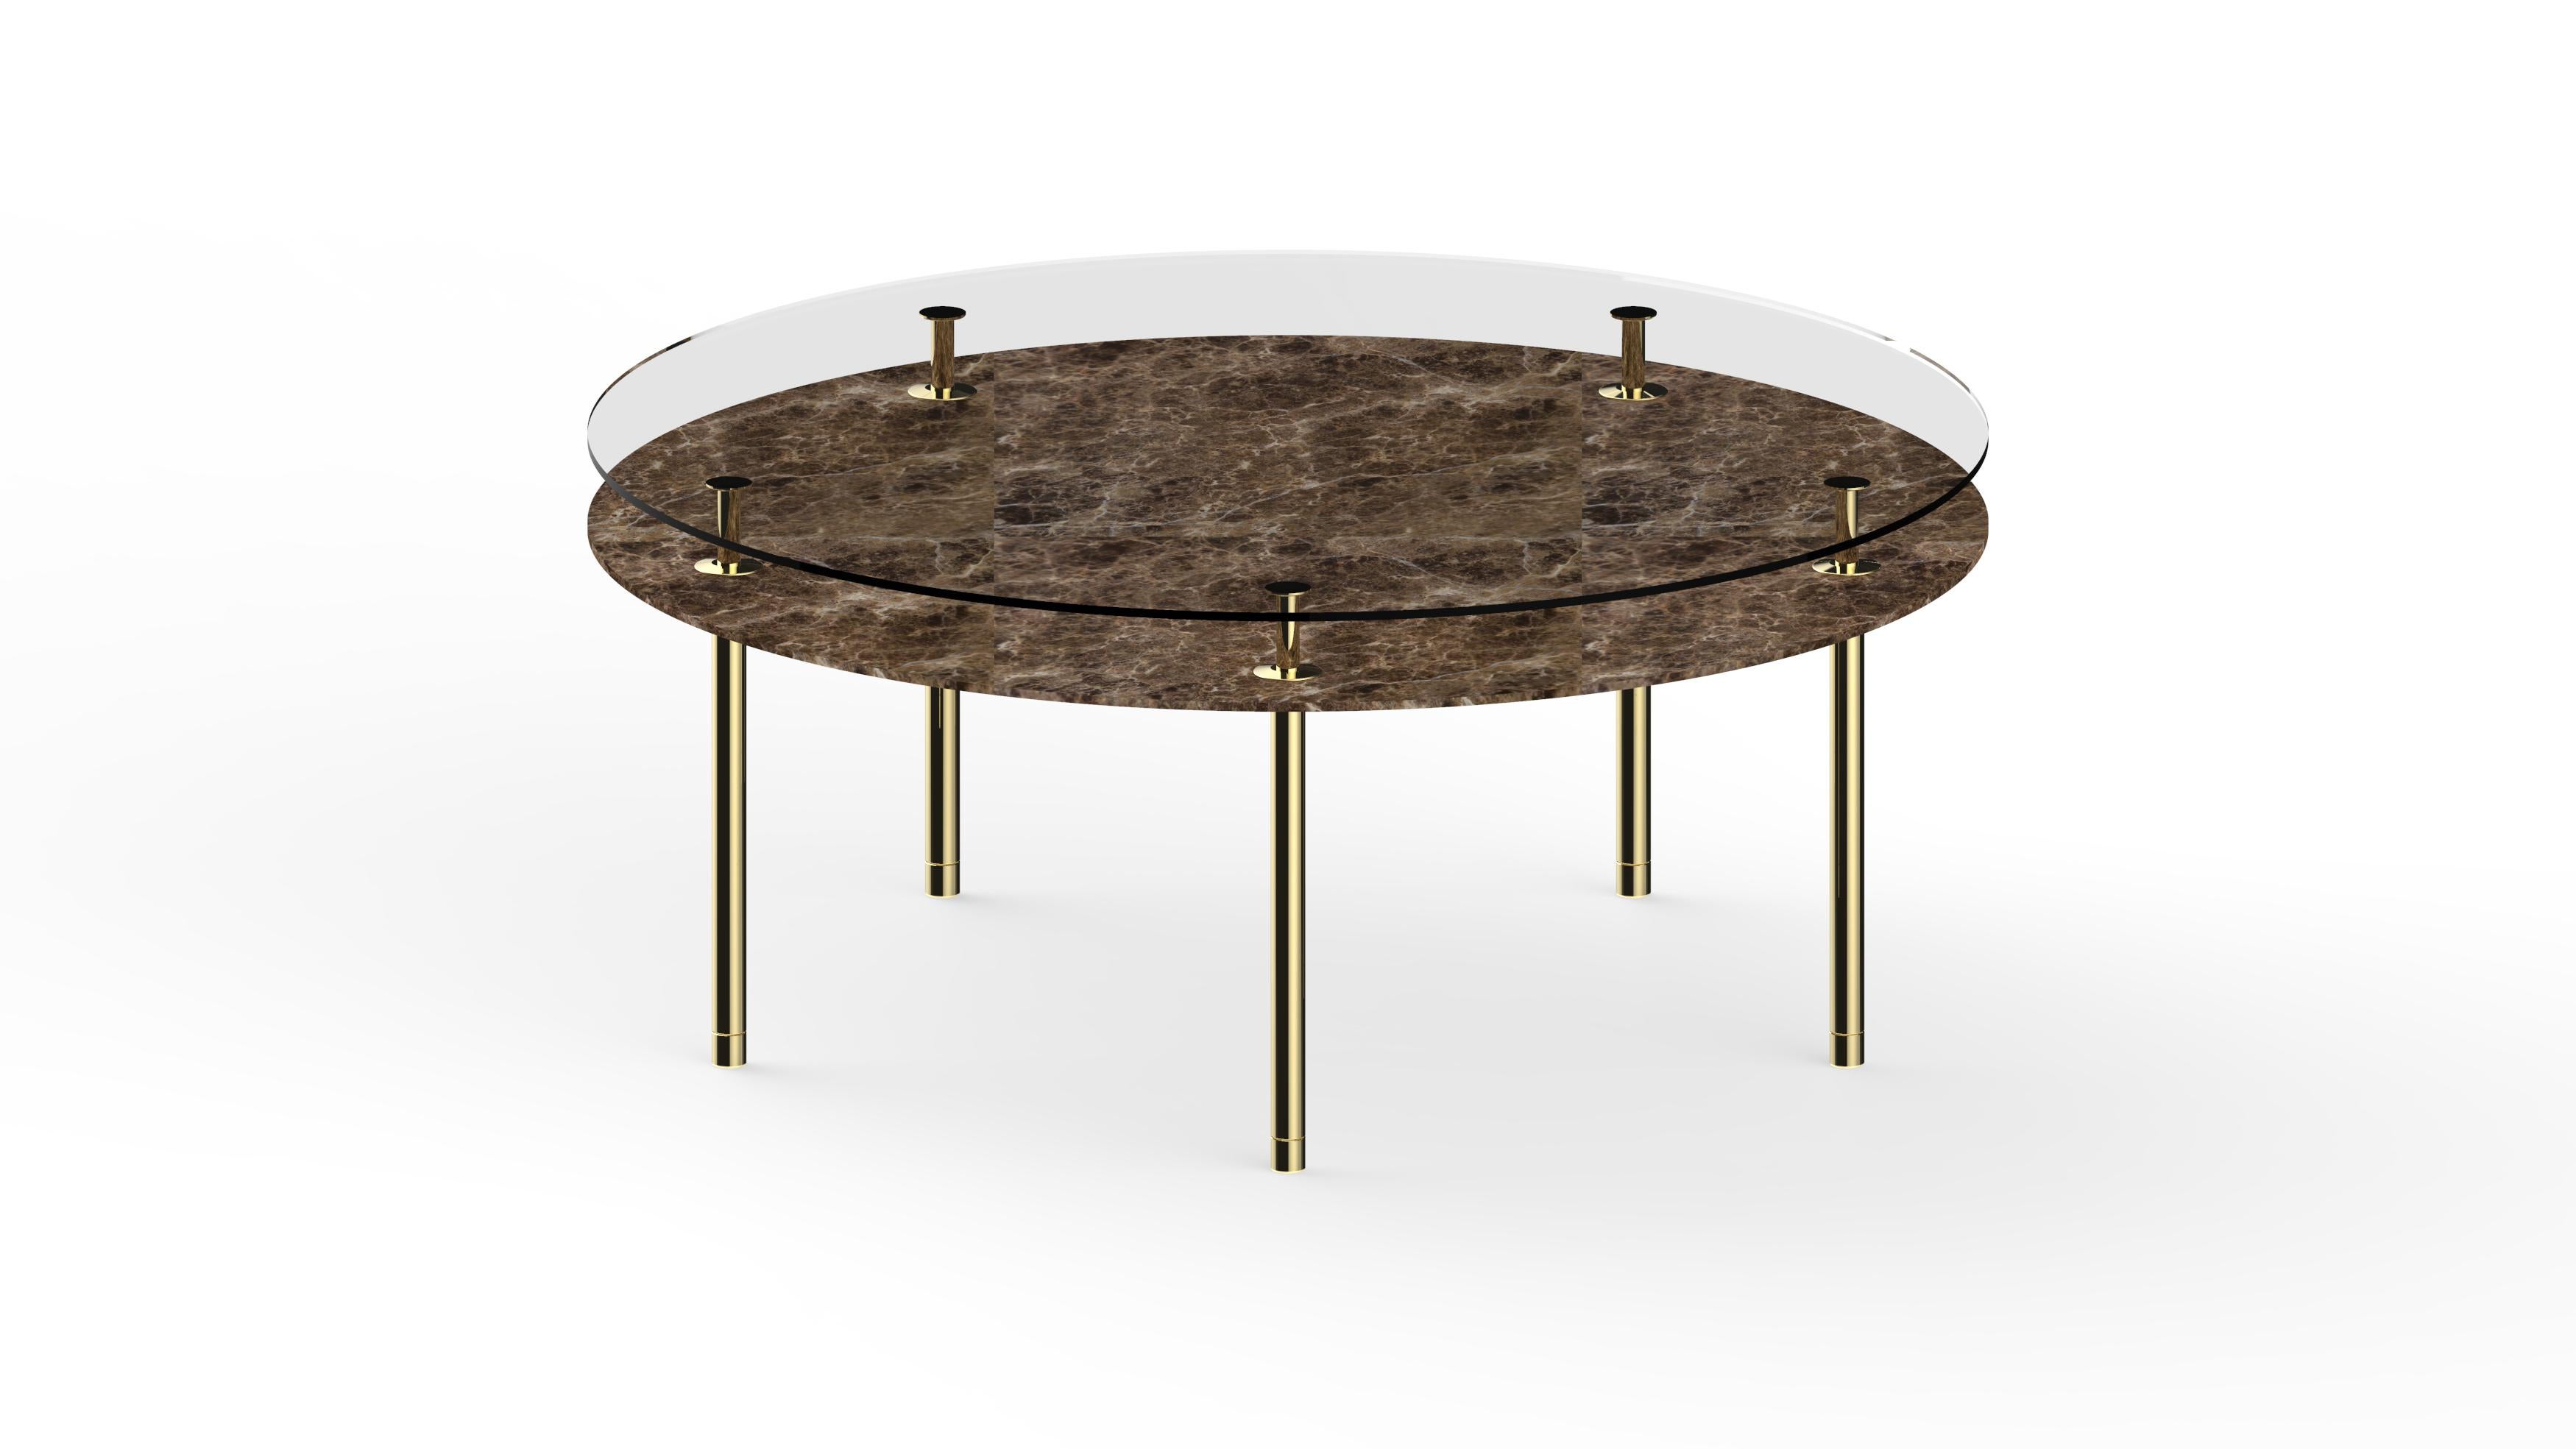 Round table in crystal and brass. The designer imagines a turning point in the use of such a precious finishes such as polished brass: from the idea of almost a unique object in its perfect craftsmanship, to the system to be built starting from the